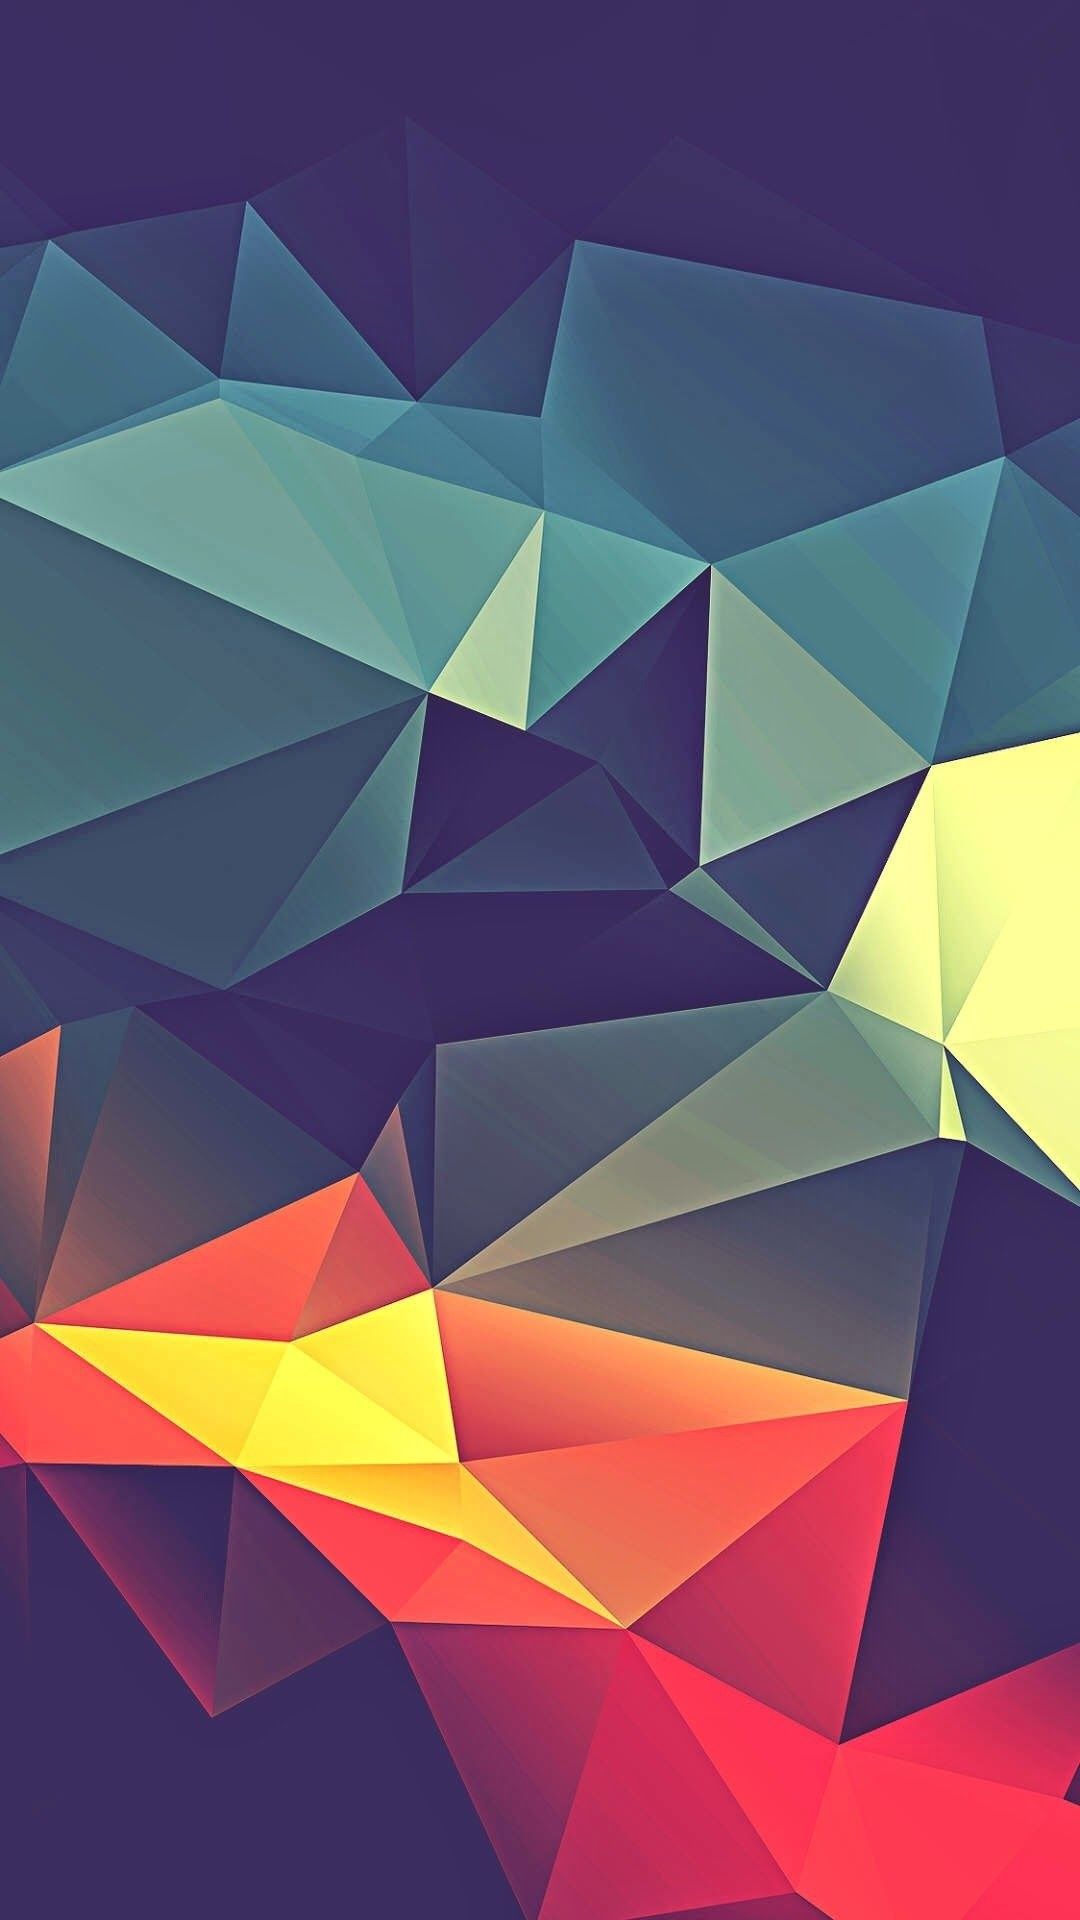 Days Of Awesome Wallpaper: Geometric Wallpaper Crypto News